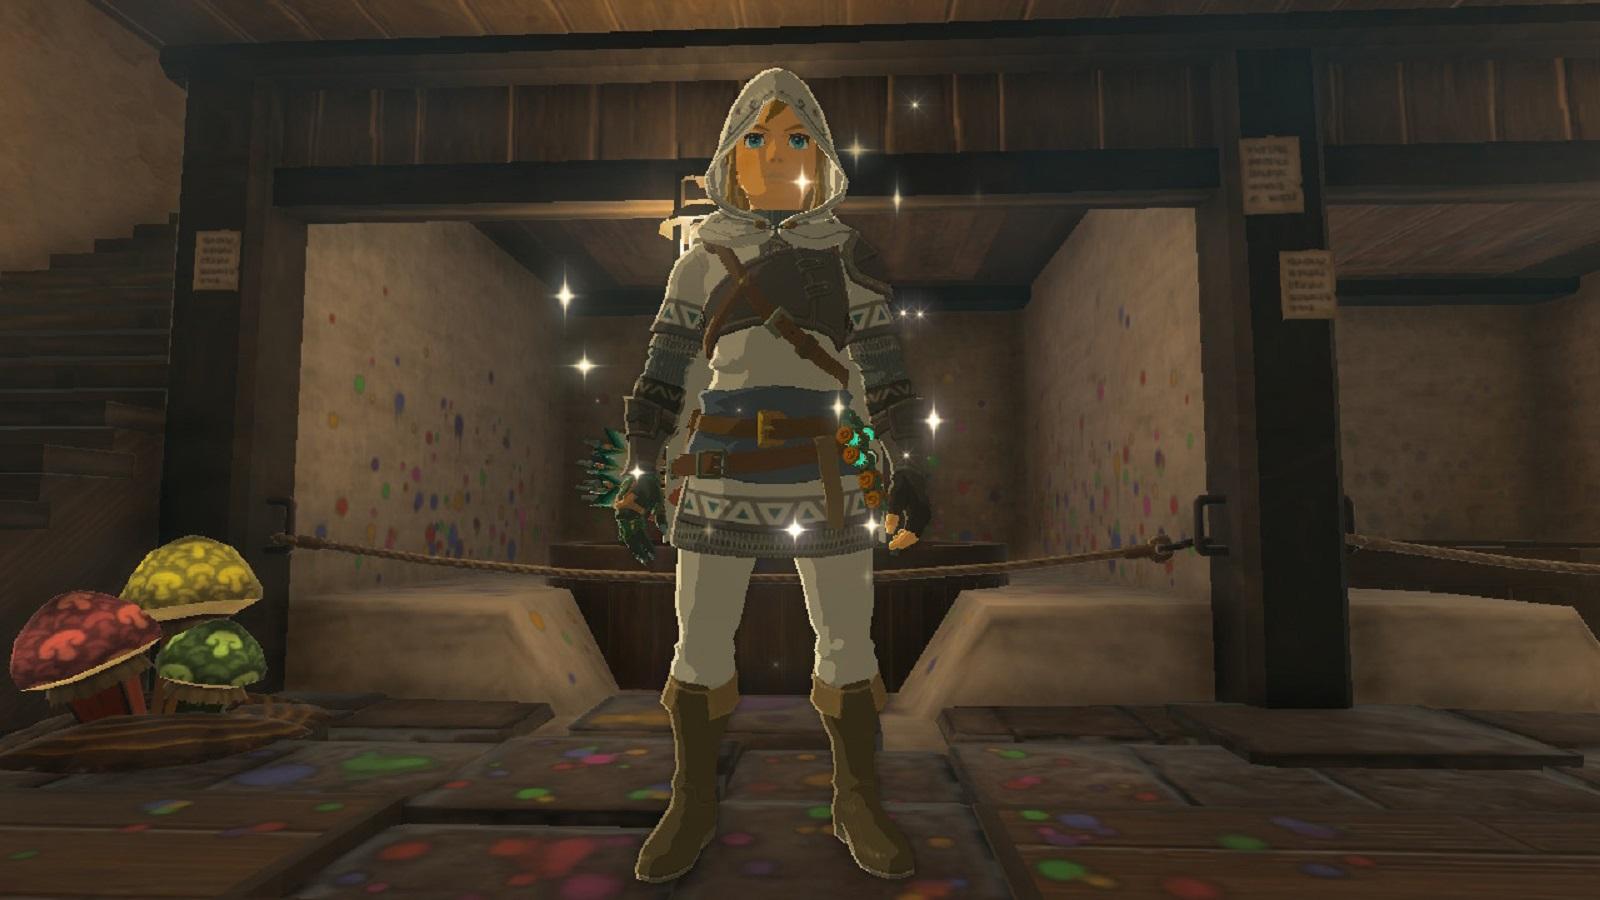 Link with dyed armor